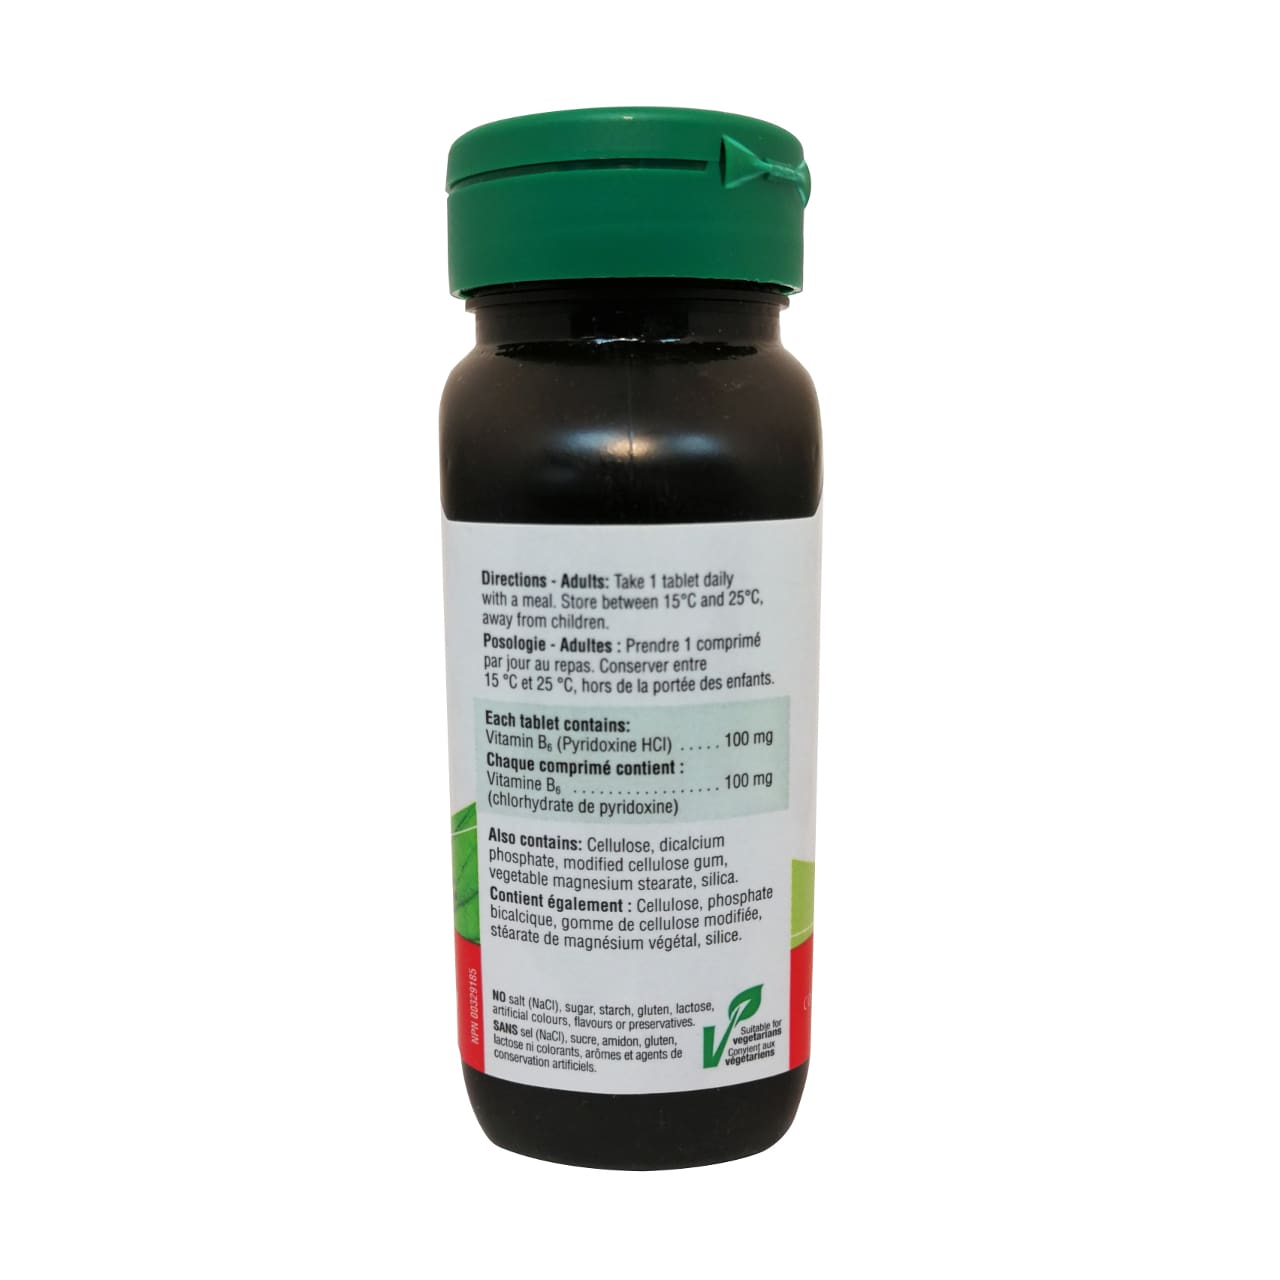 Product directions and ingredients for Jamieson B6 100mg in French and English